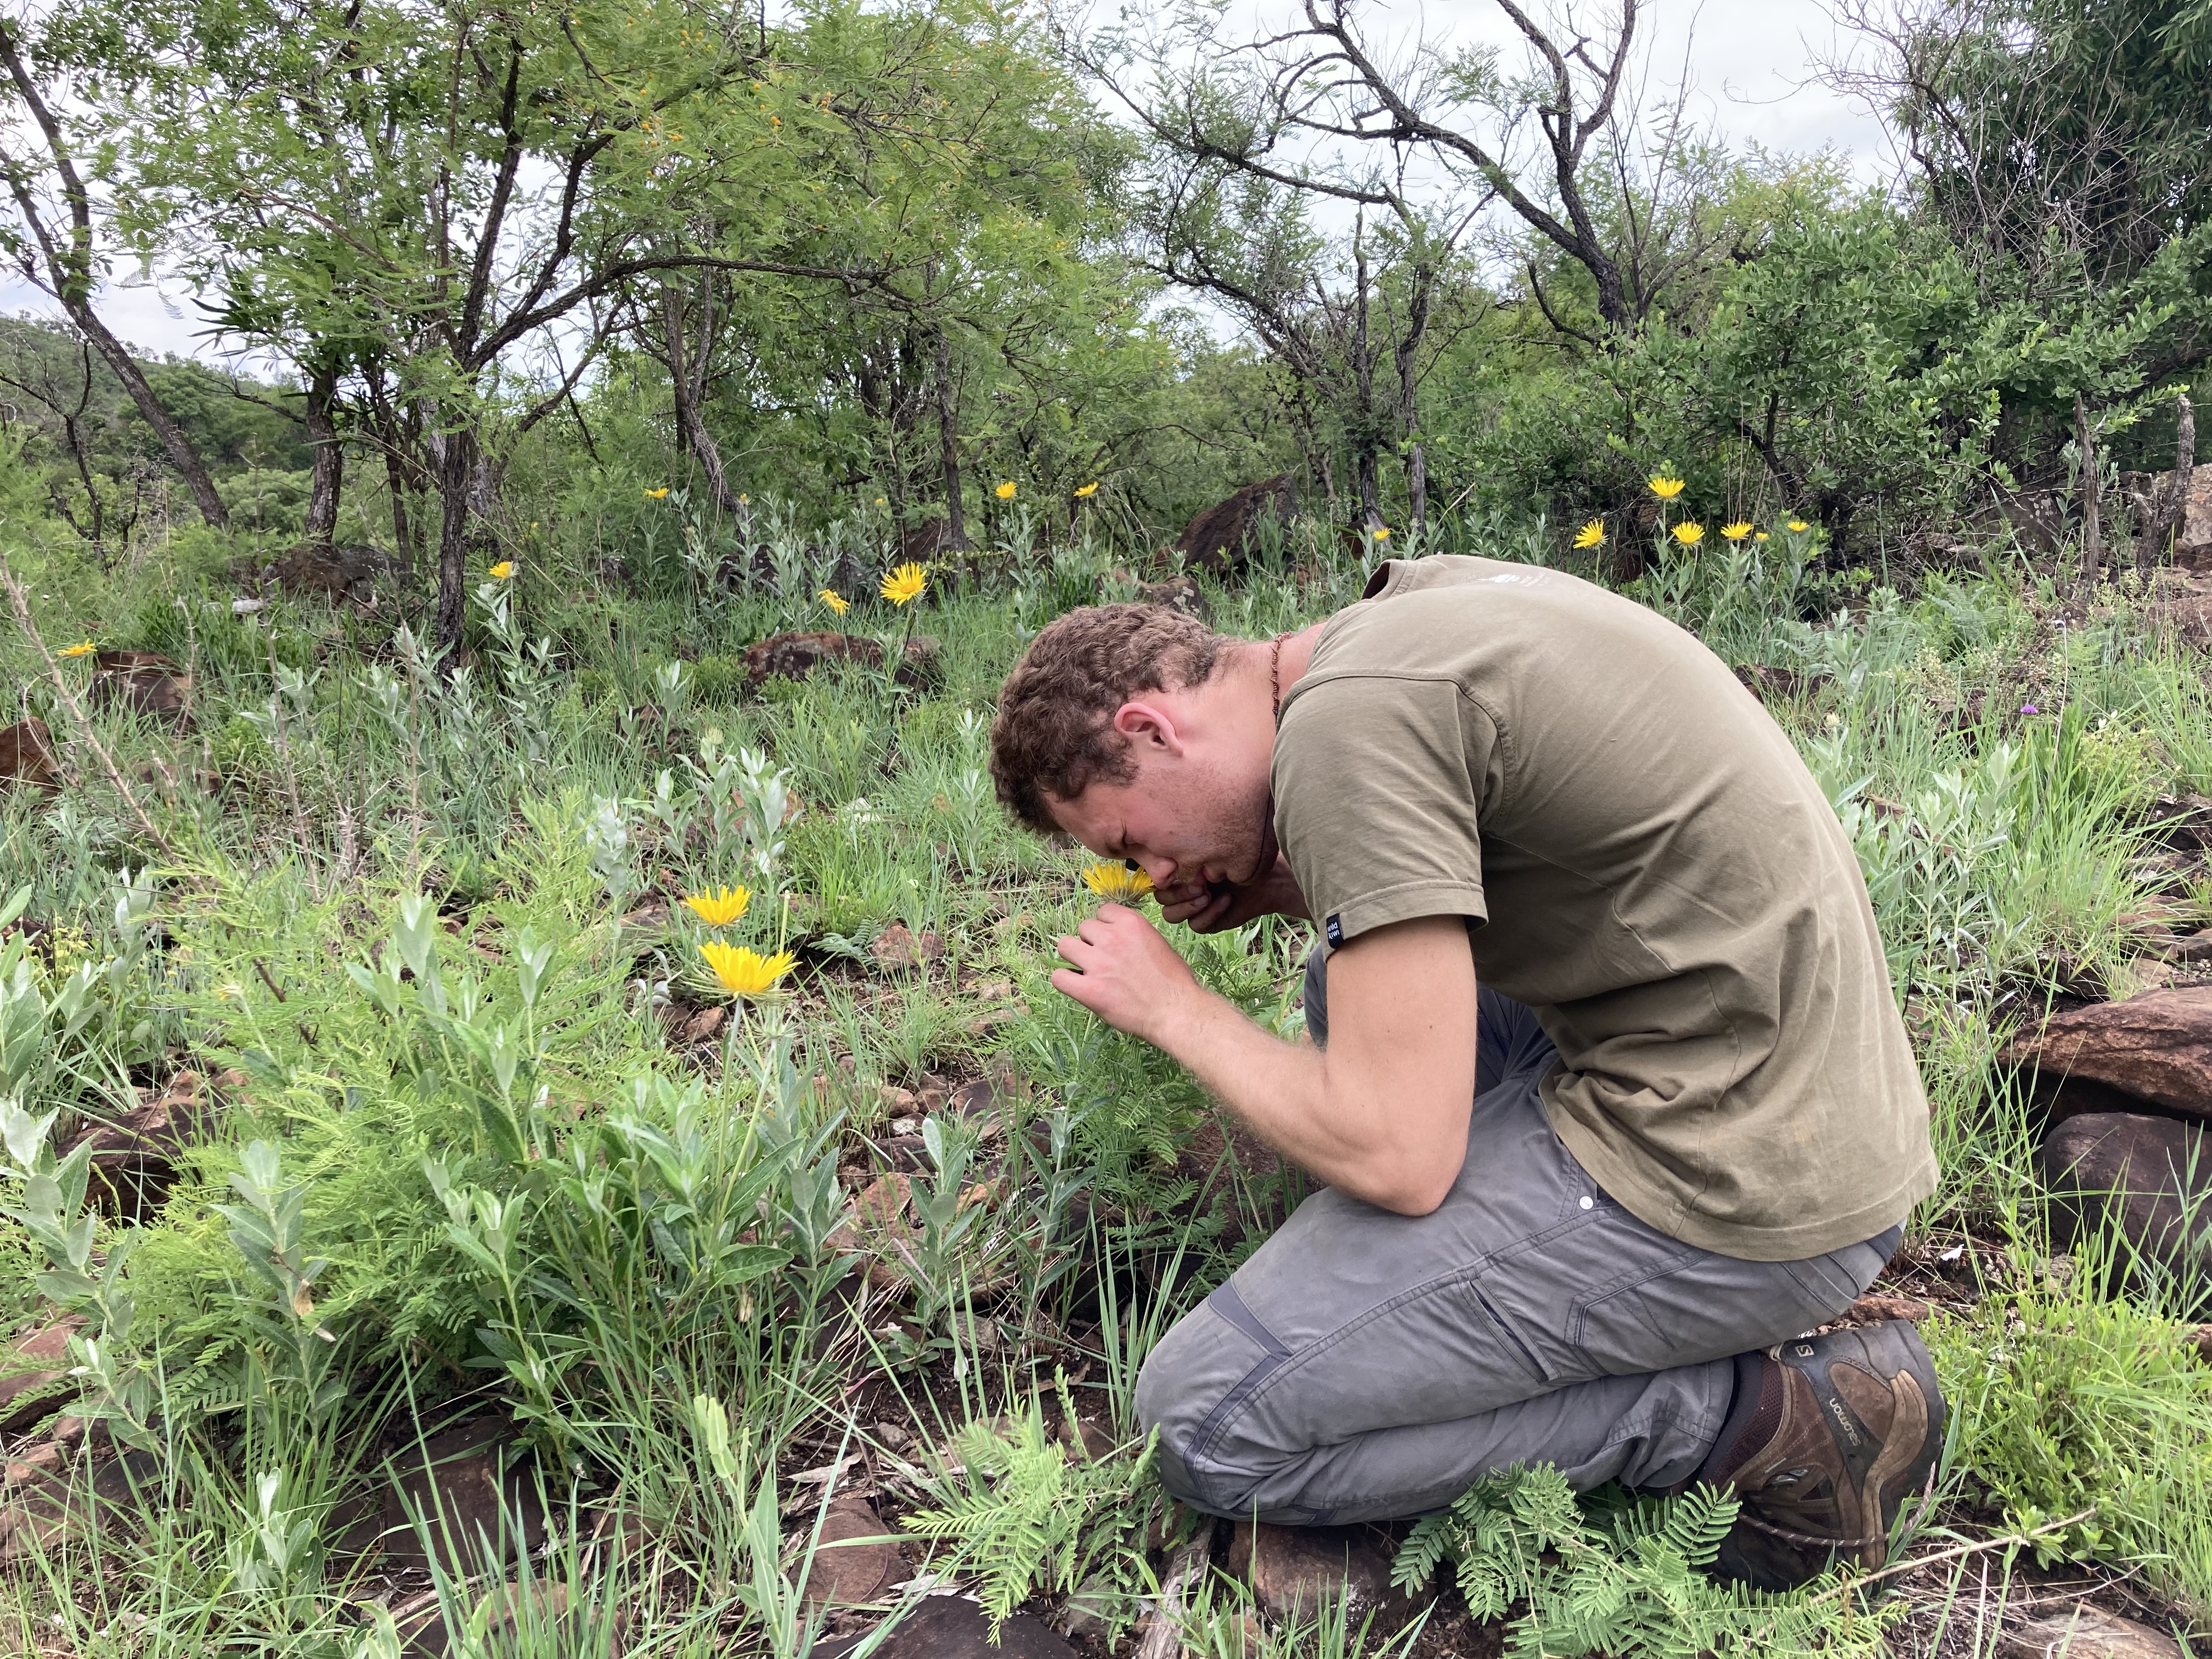 TJ Samojedny kneels down to inspect a yellow flower while doing field research in South Africa.